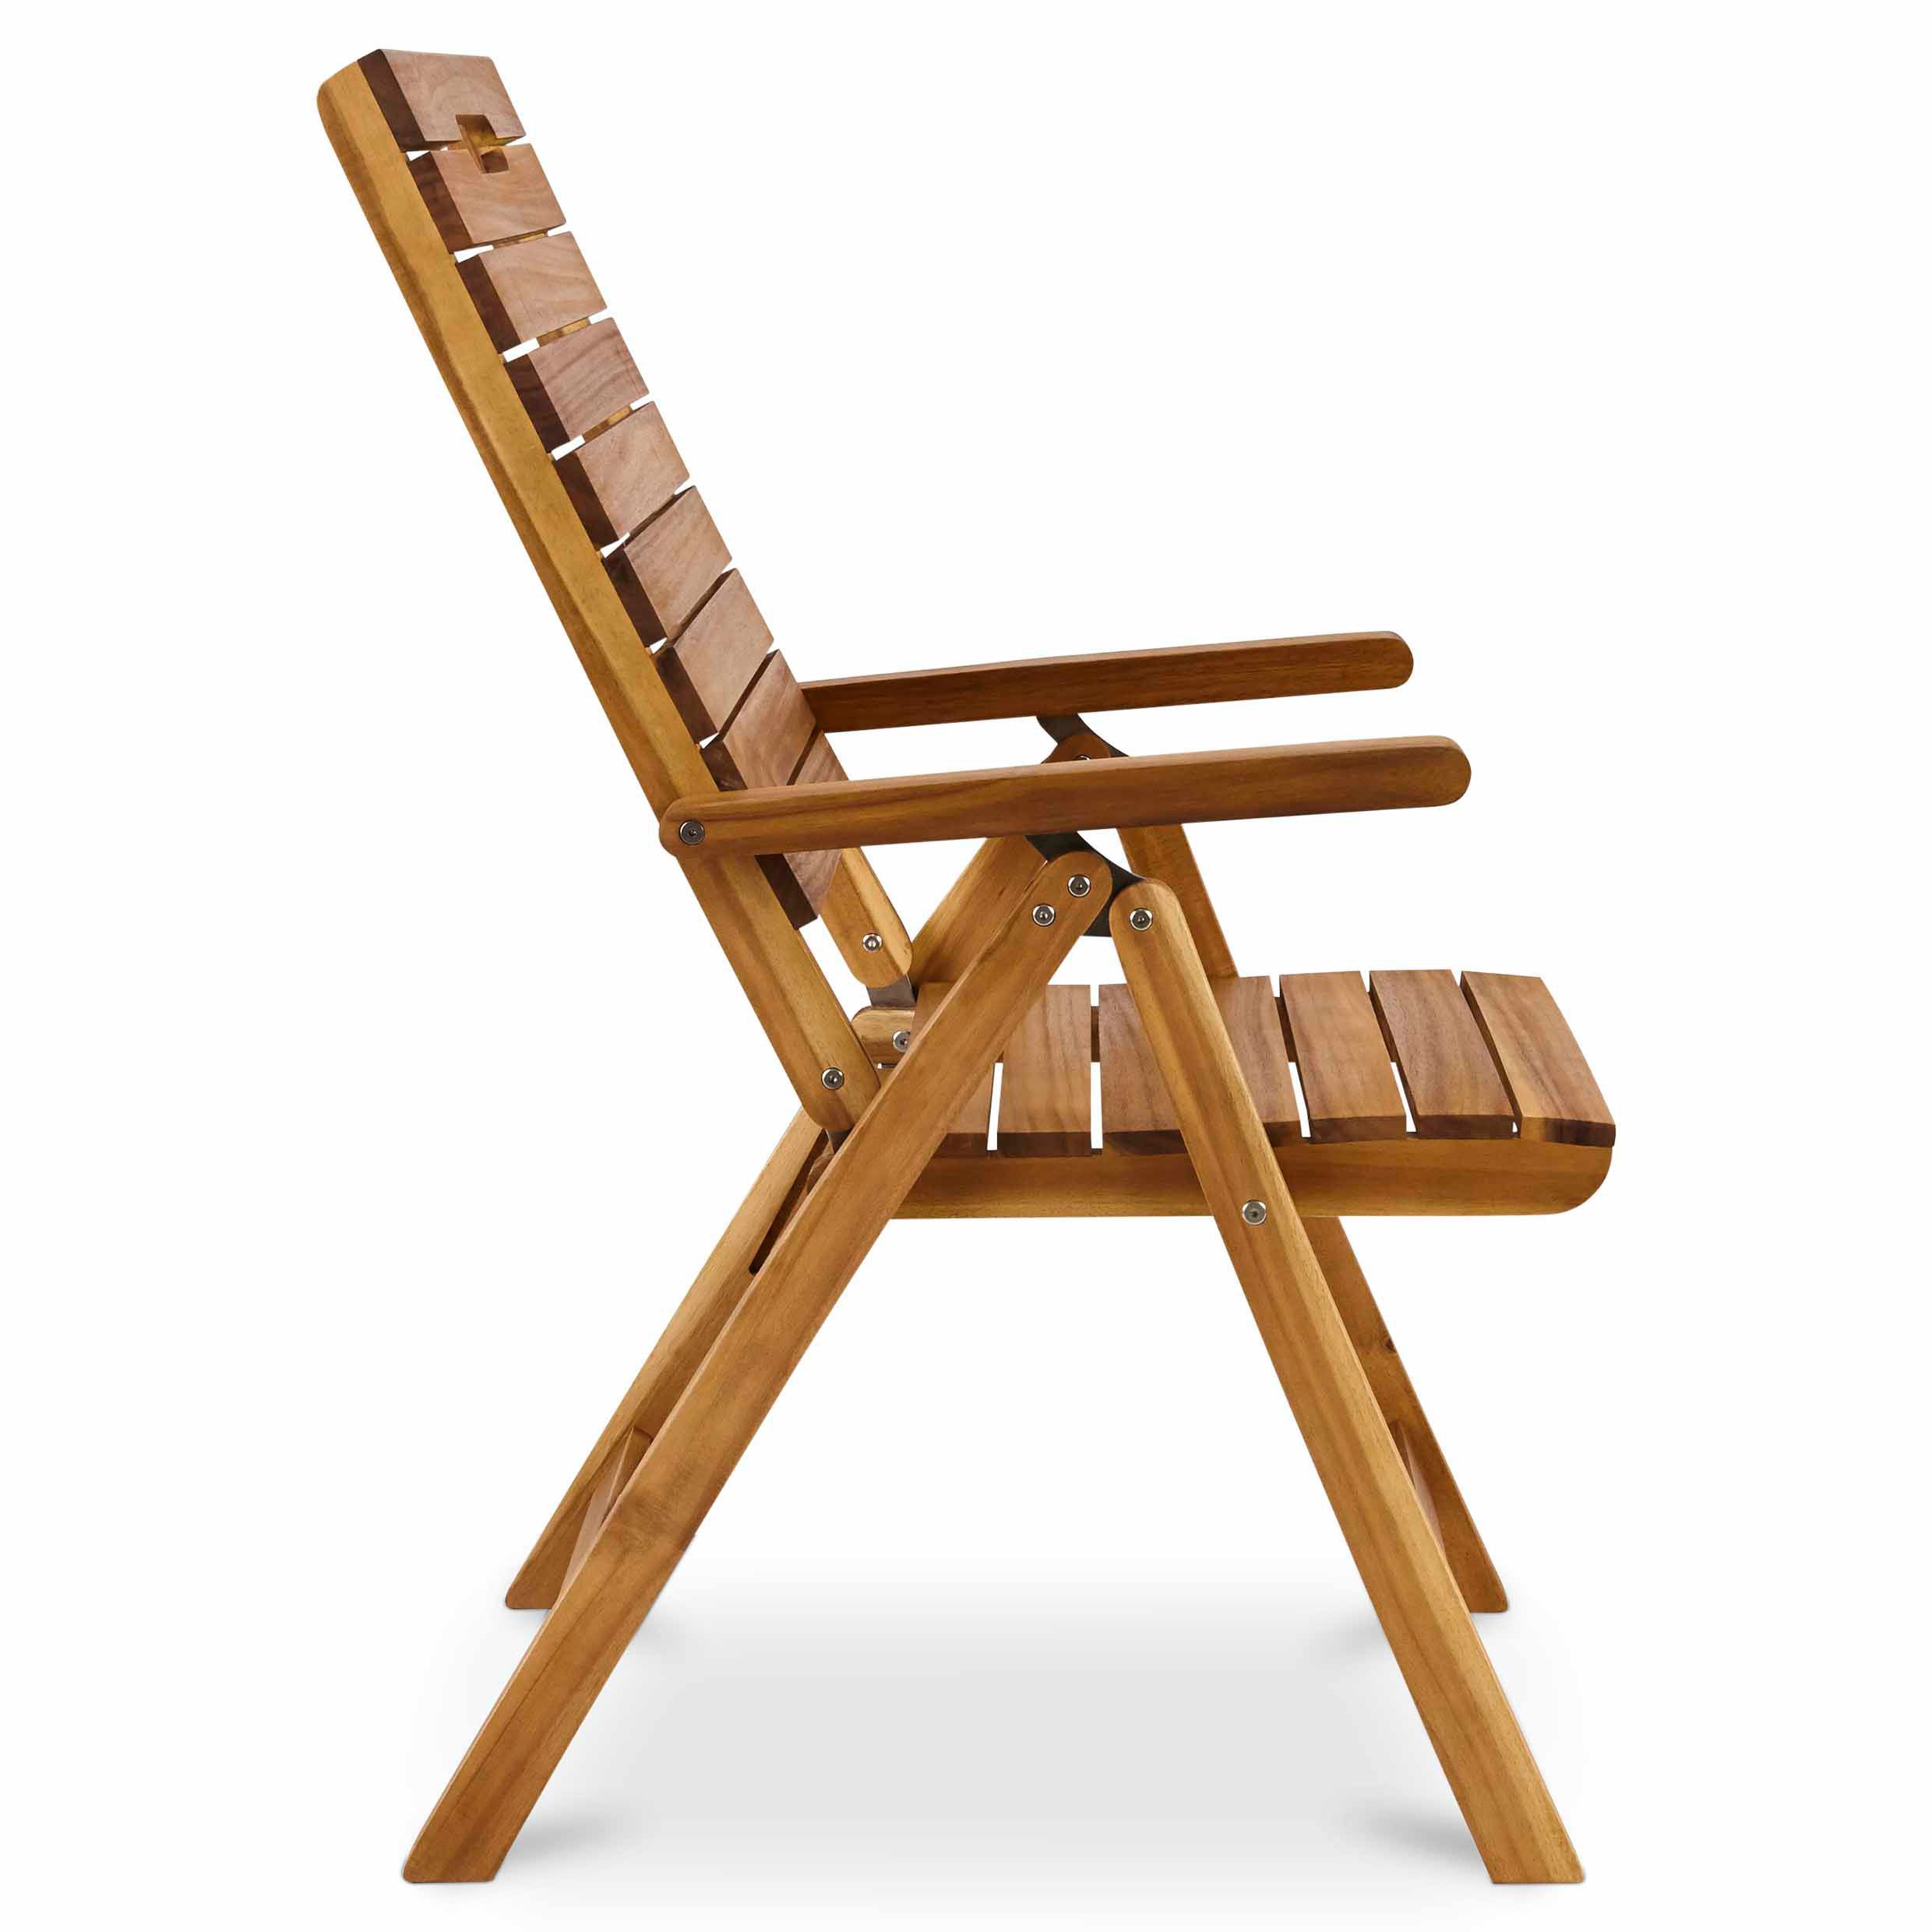 GoodHome Denia Brown Wooden Foldable Recliner Chair